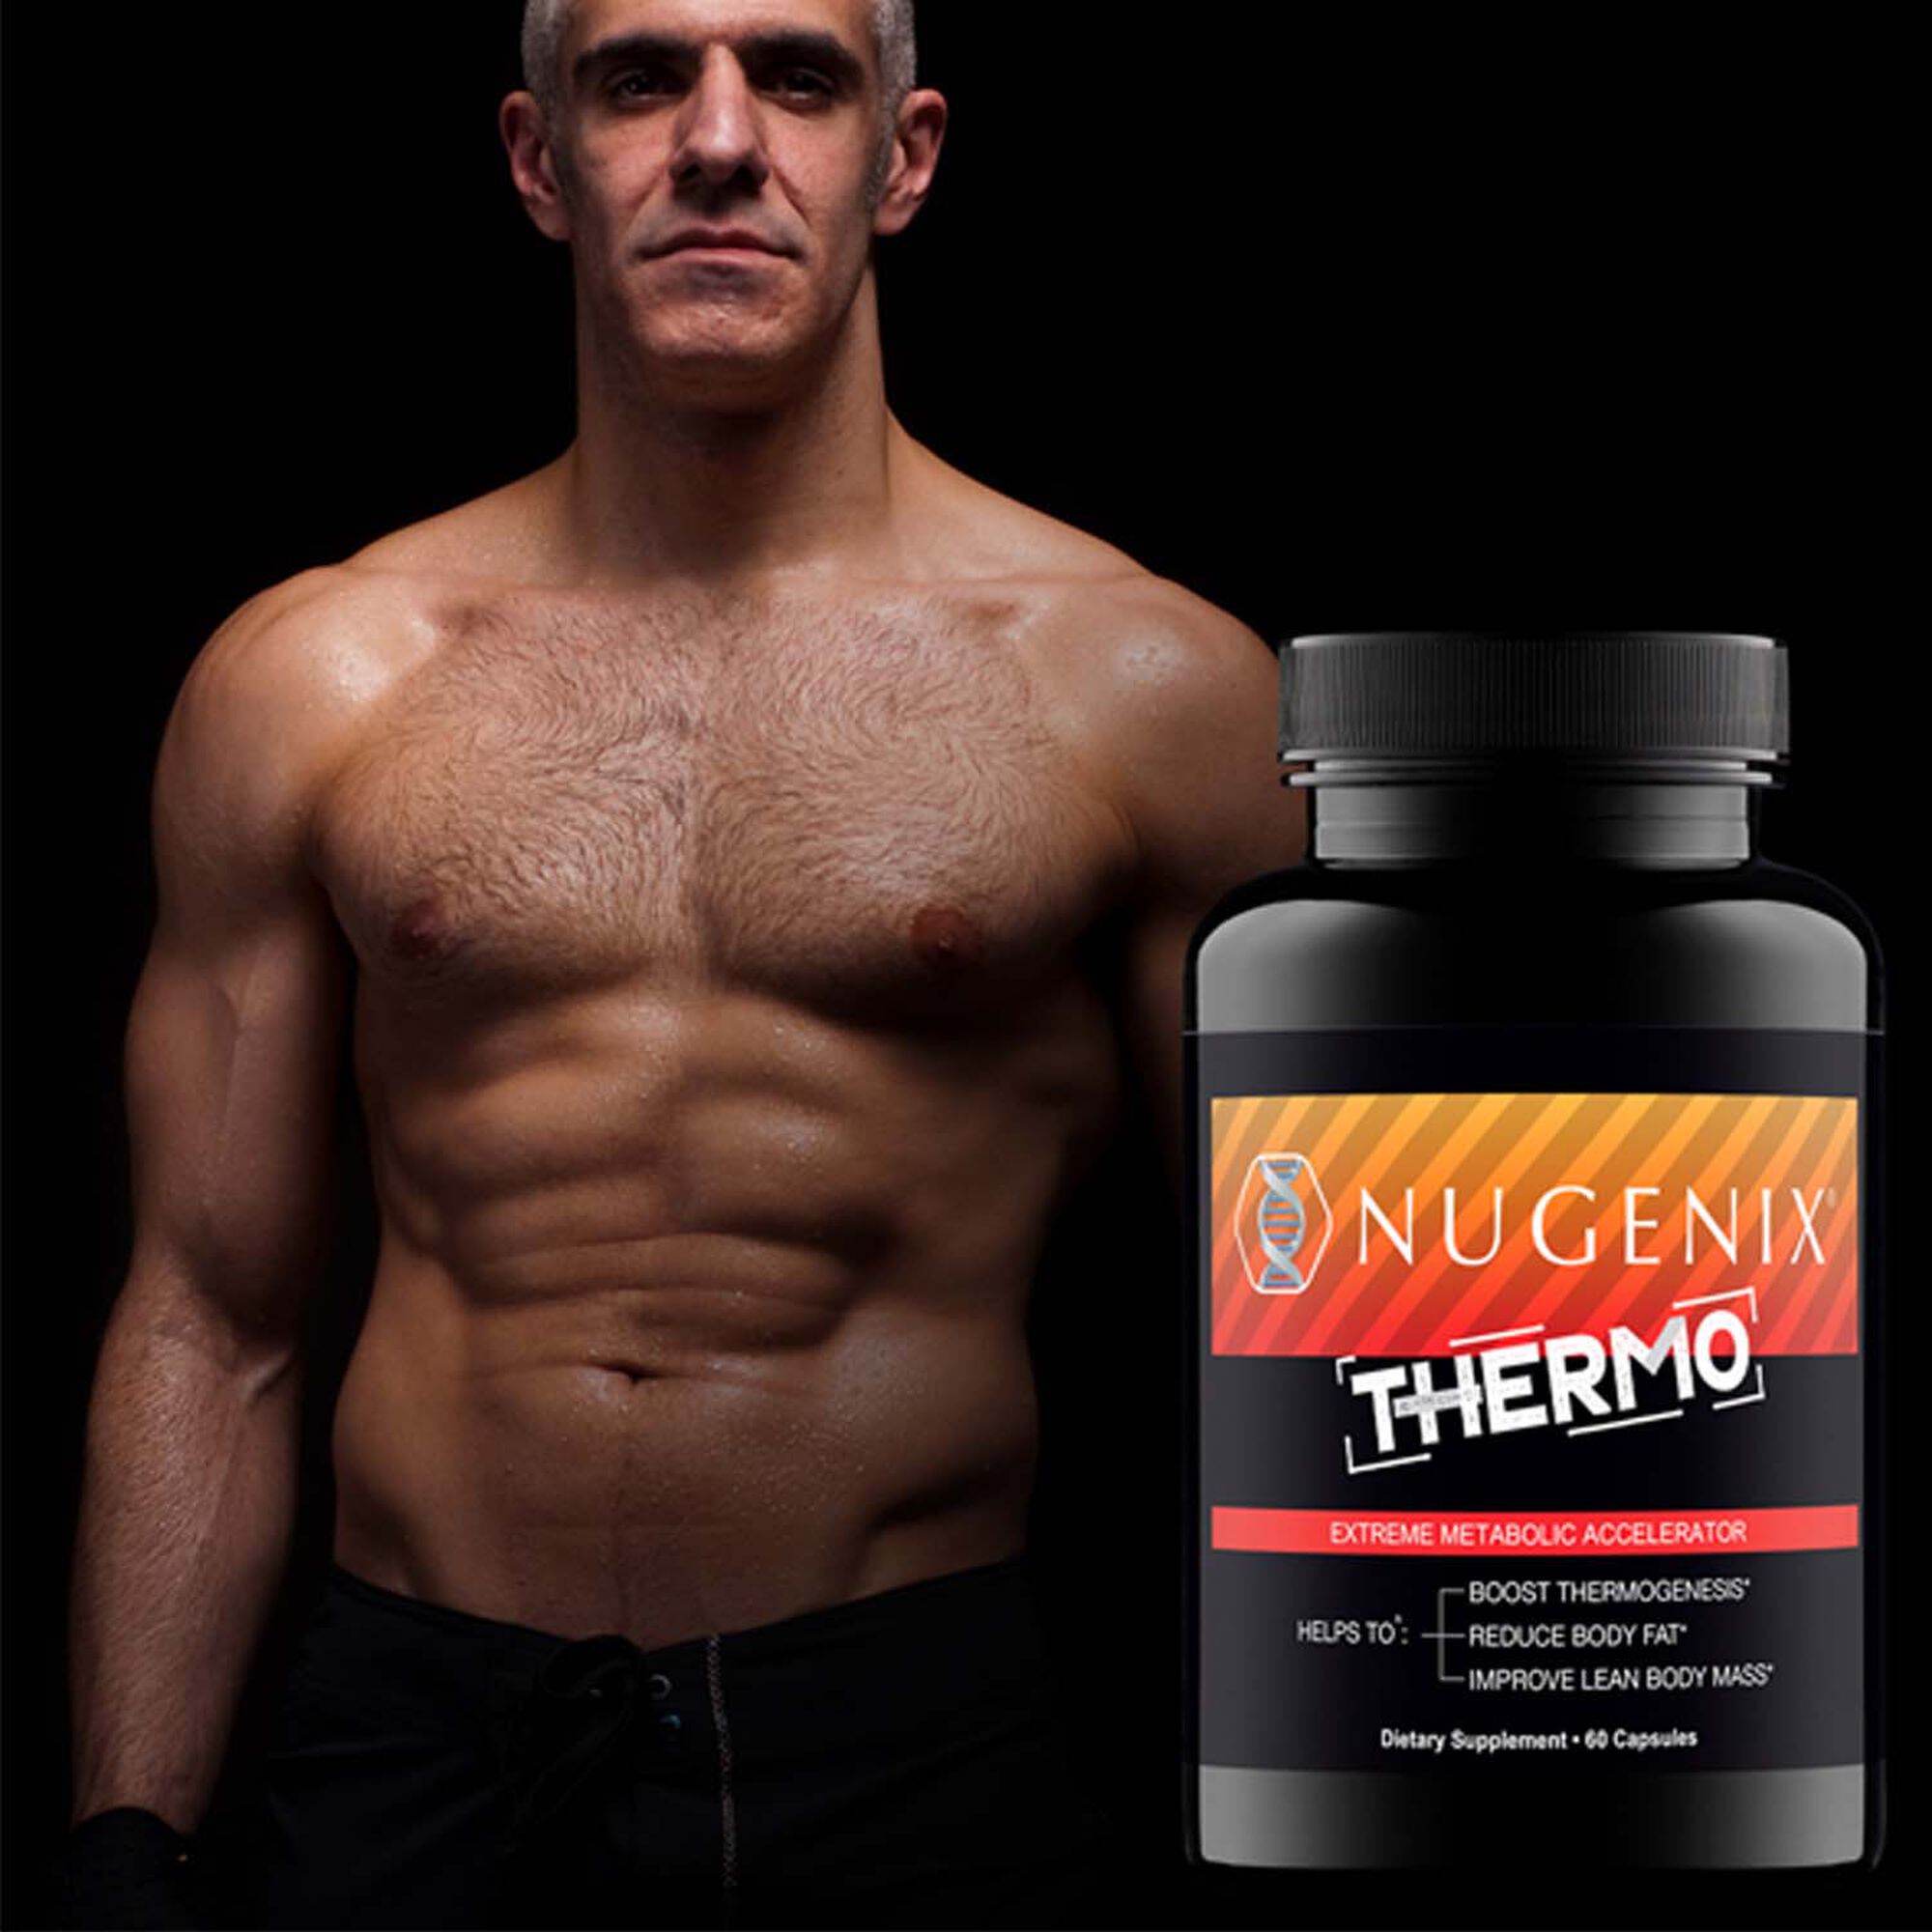 452331 Nugenix® Nugenix® Thermo cranks up the heat on your body's